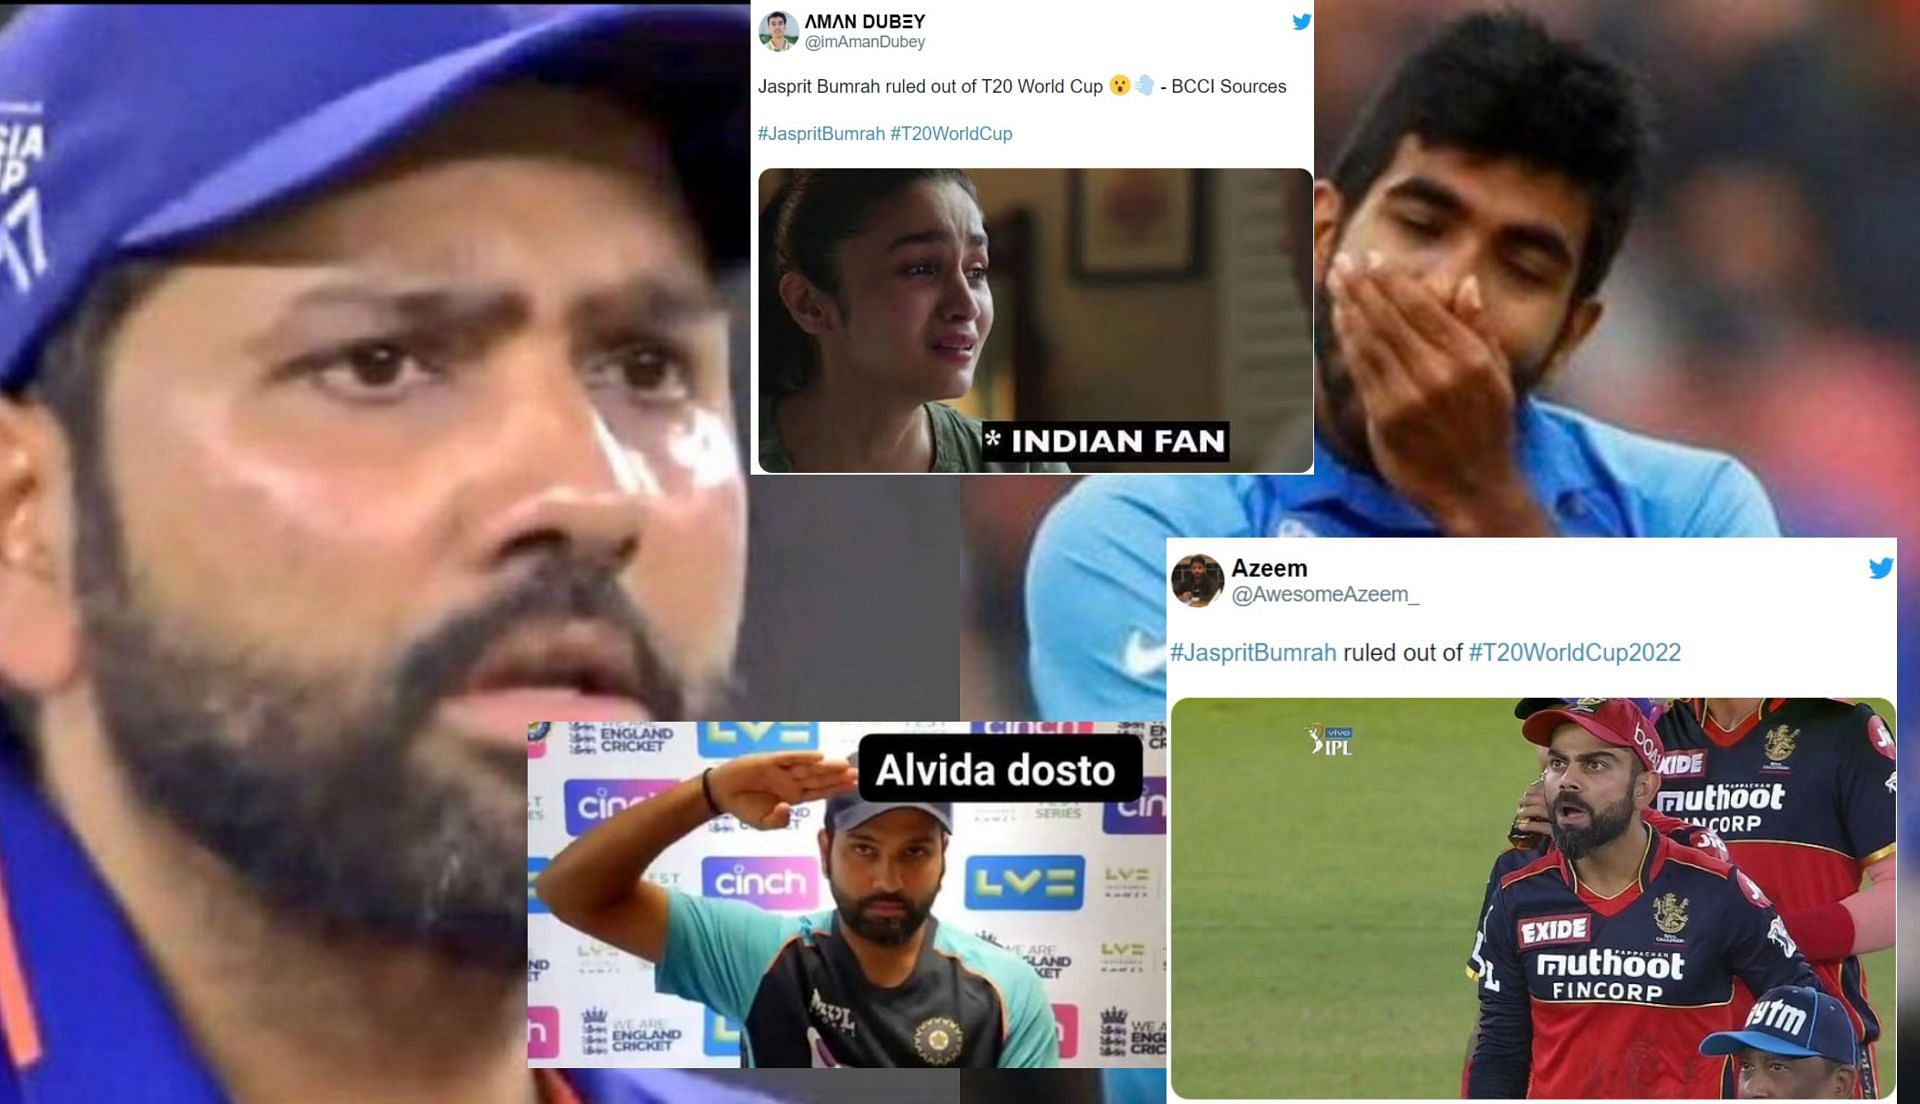 Top 10 funny memes after reports emerge that Jasprit Bumrah has been ruled out of T20 World Cup 2022